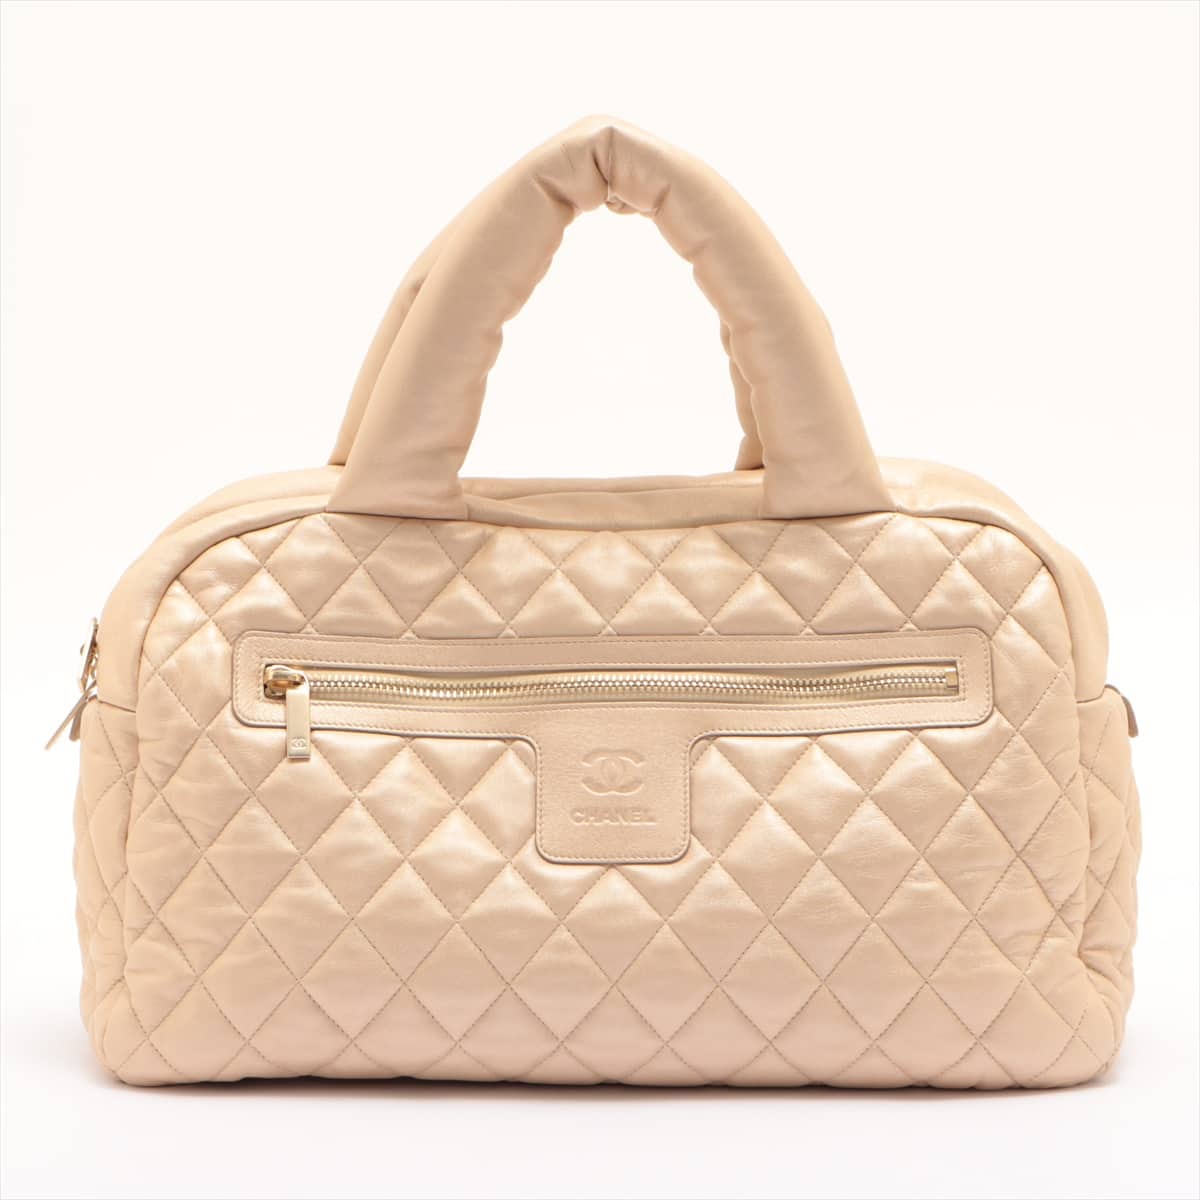 Chanel Coco Cocoon Lambskin Boston bag Gold Gold Metal fittings 13XXXXXX